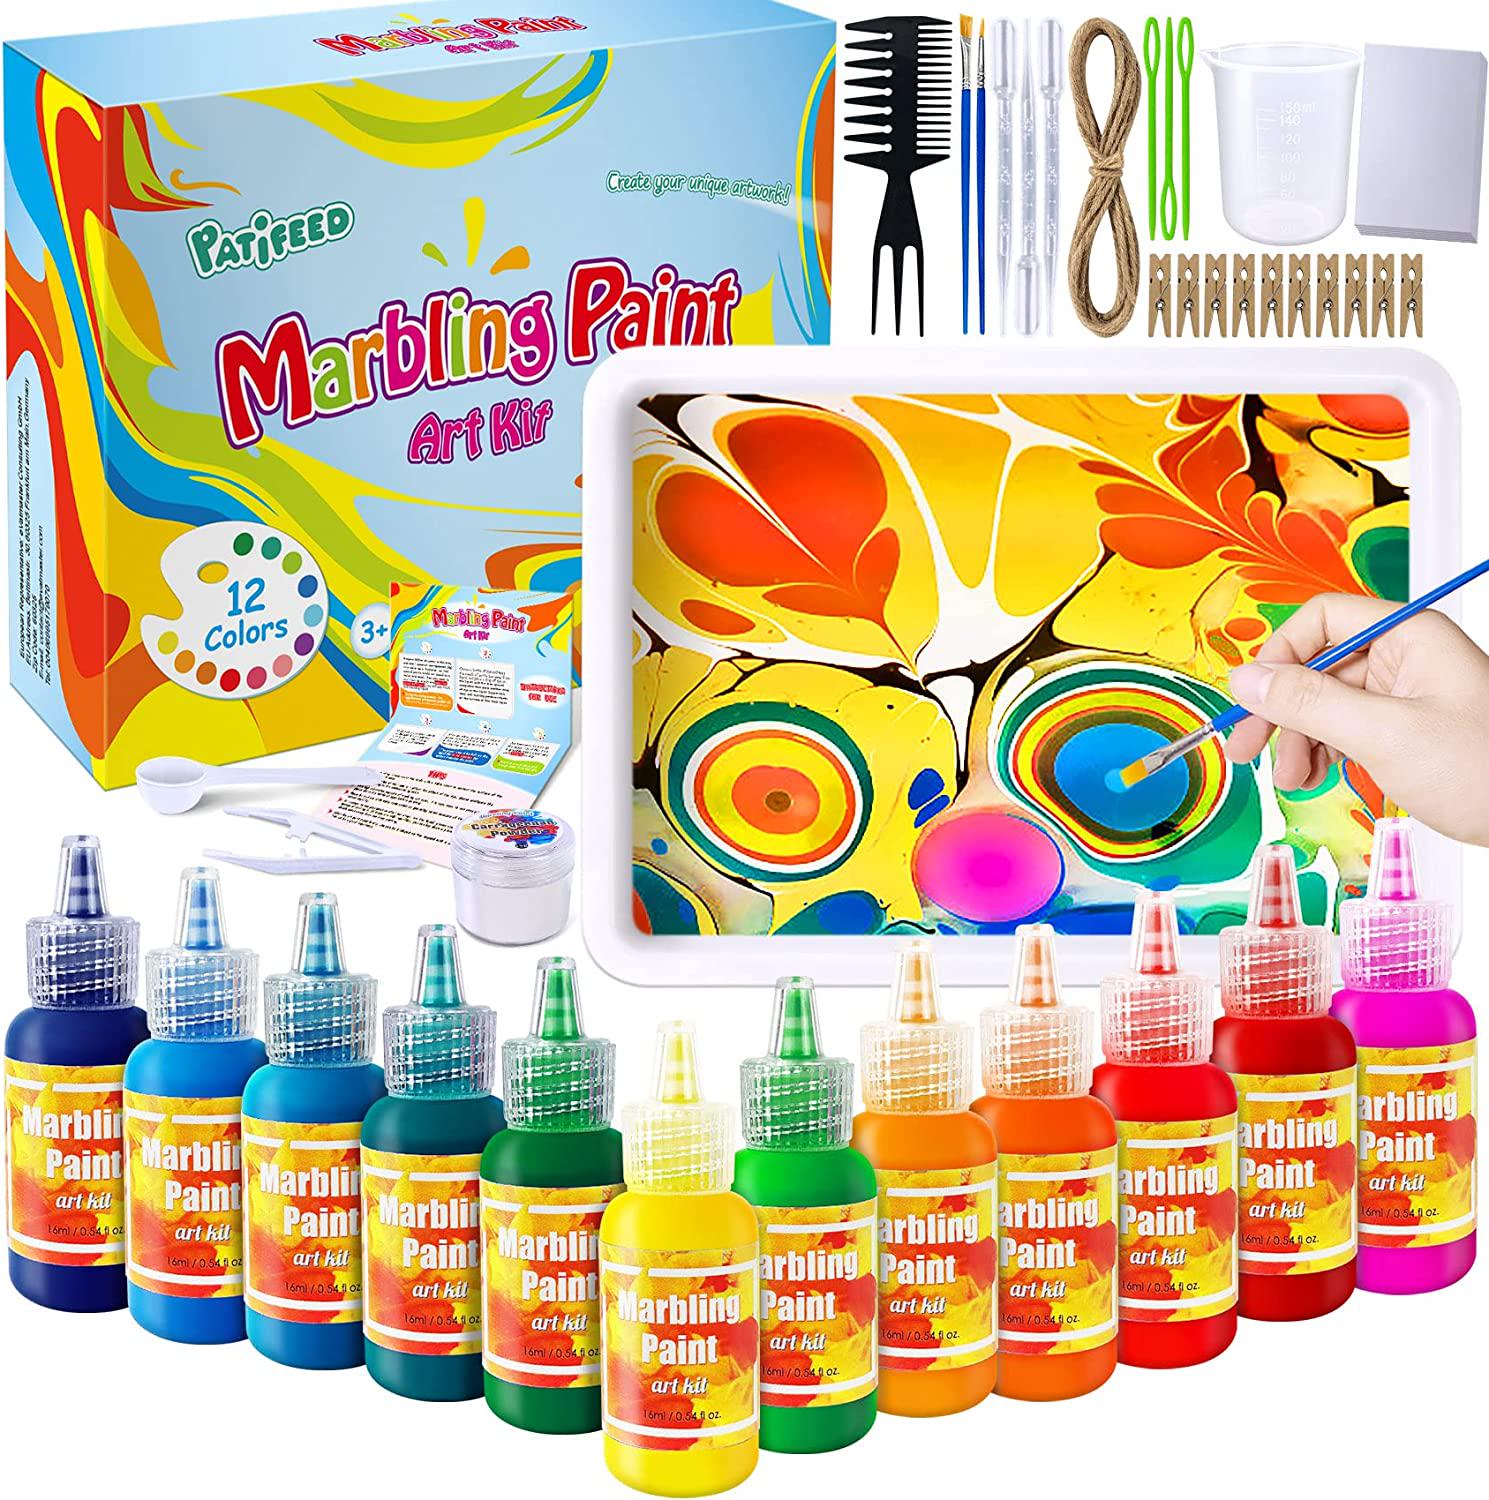 PATIFEED, Marbling Paint Art Kit for Kids, Arts and Crafts for Girls Boys Ages 6-12, Craft Kits Art Set Toy Gifts for Kids 3 4 5 6 7 8 9 10+ Marble Painting Birthday Christmas, 12 Colors